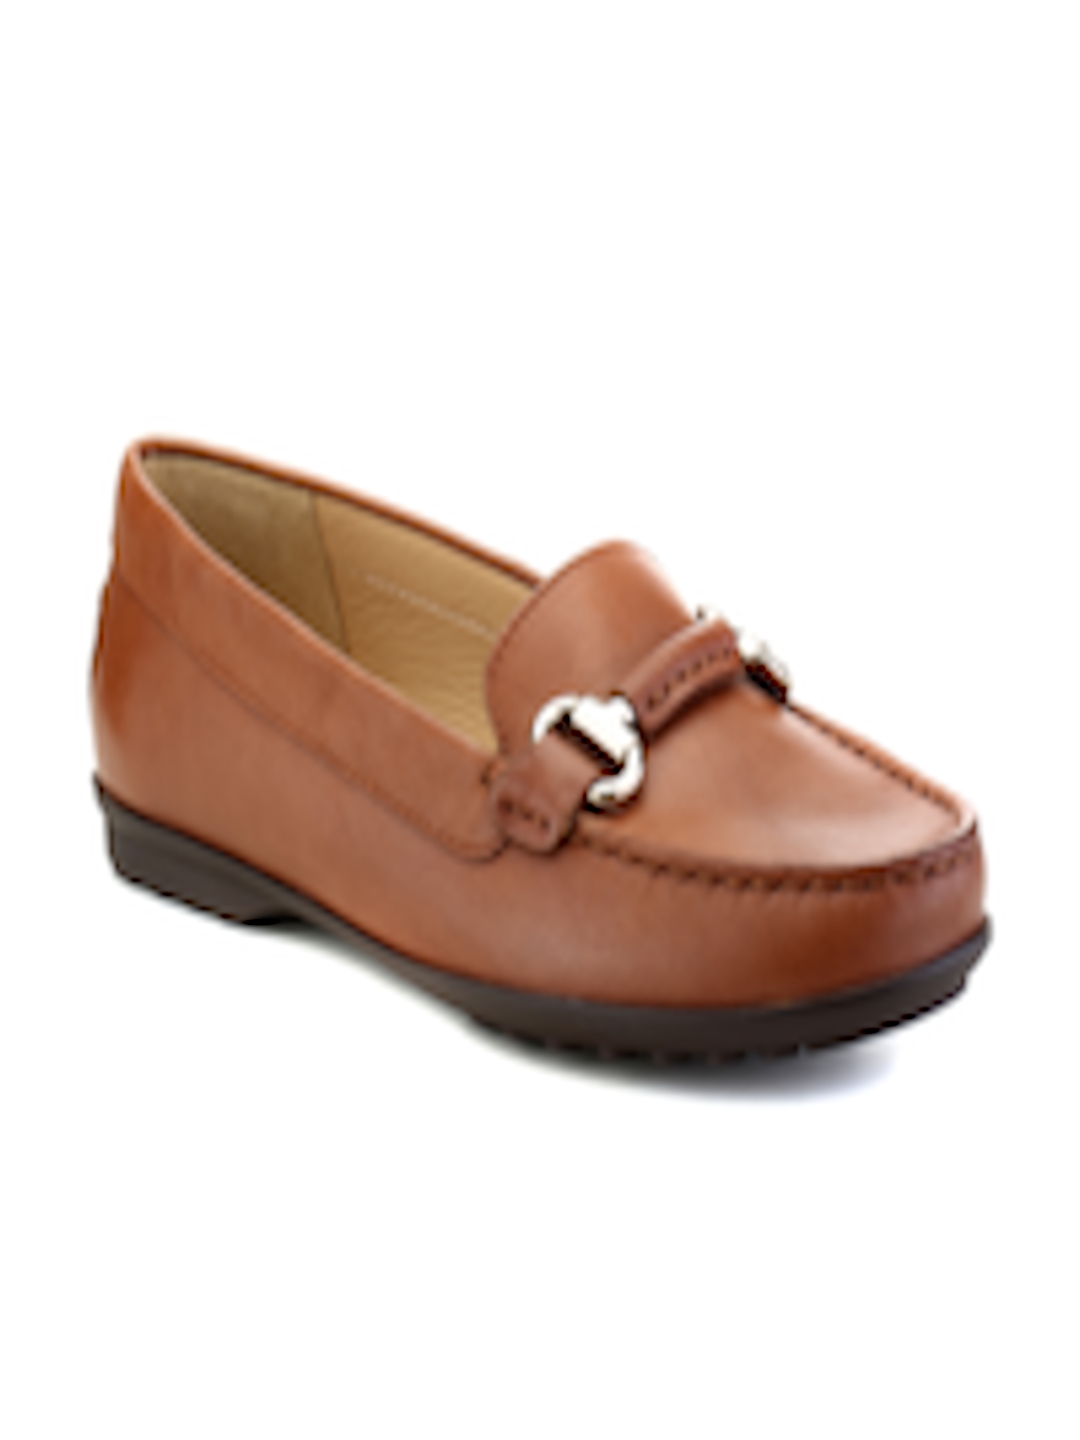 Buy Geox Women Brown Loafers - Casual Shoes for Women 2194374 | Myntra